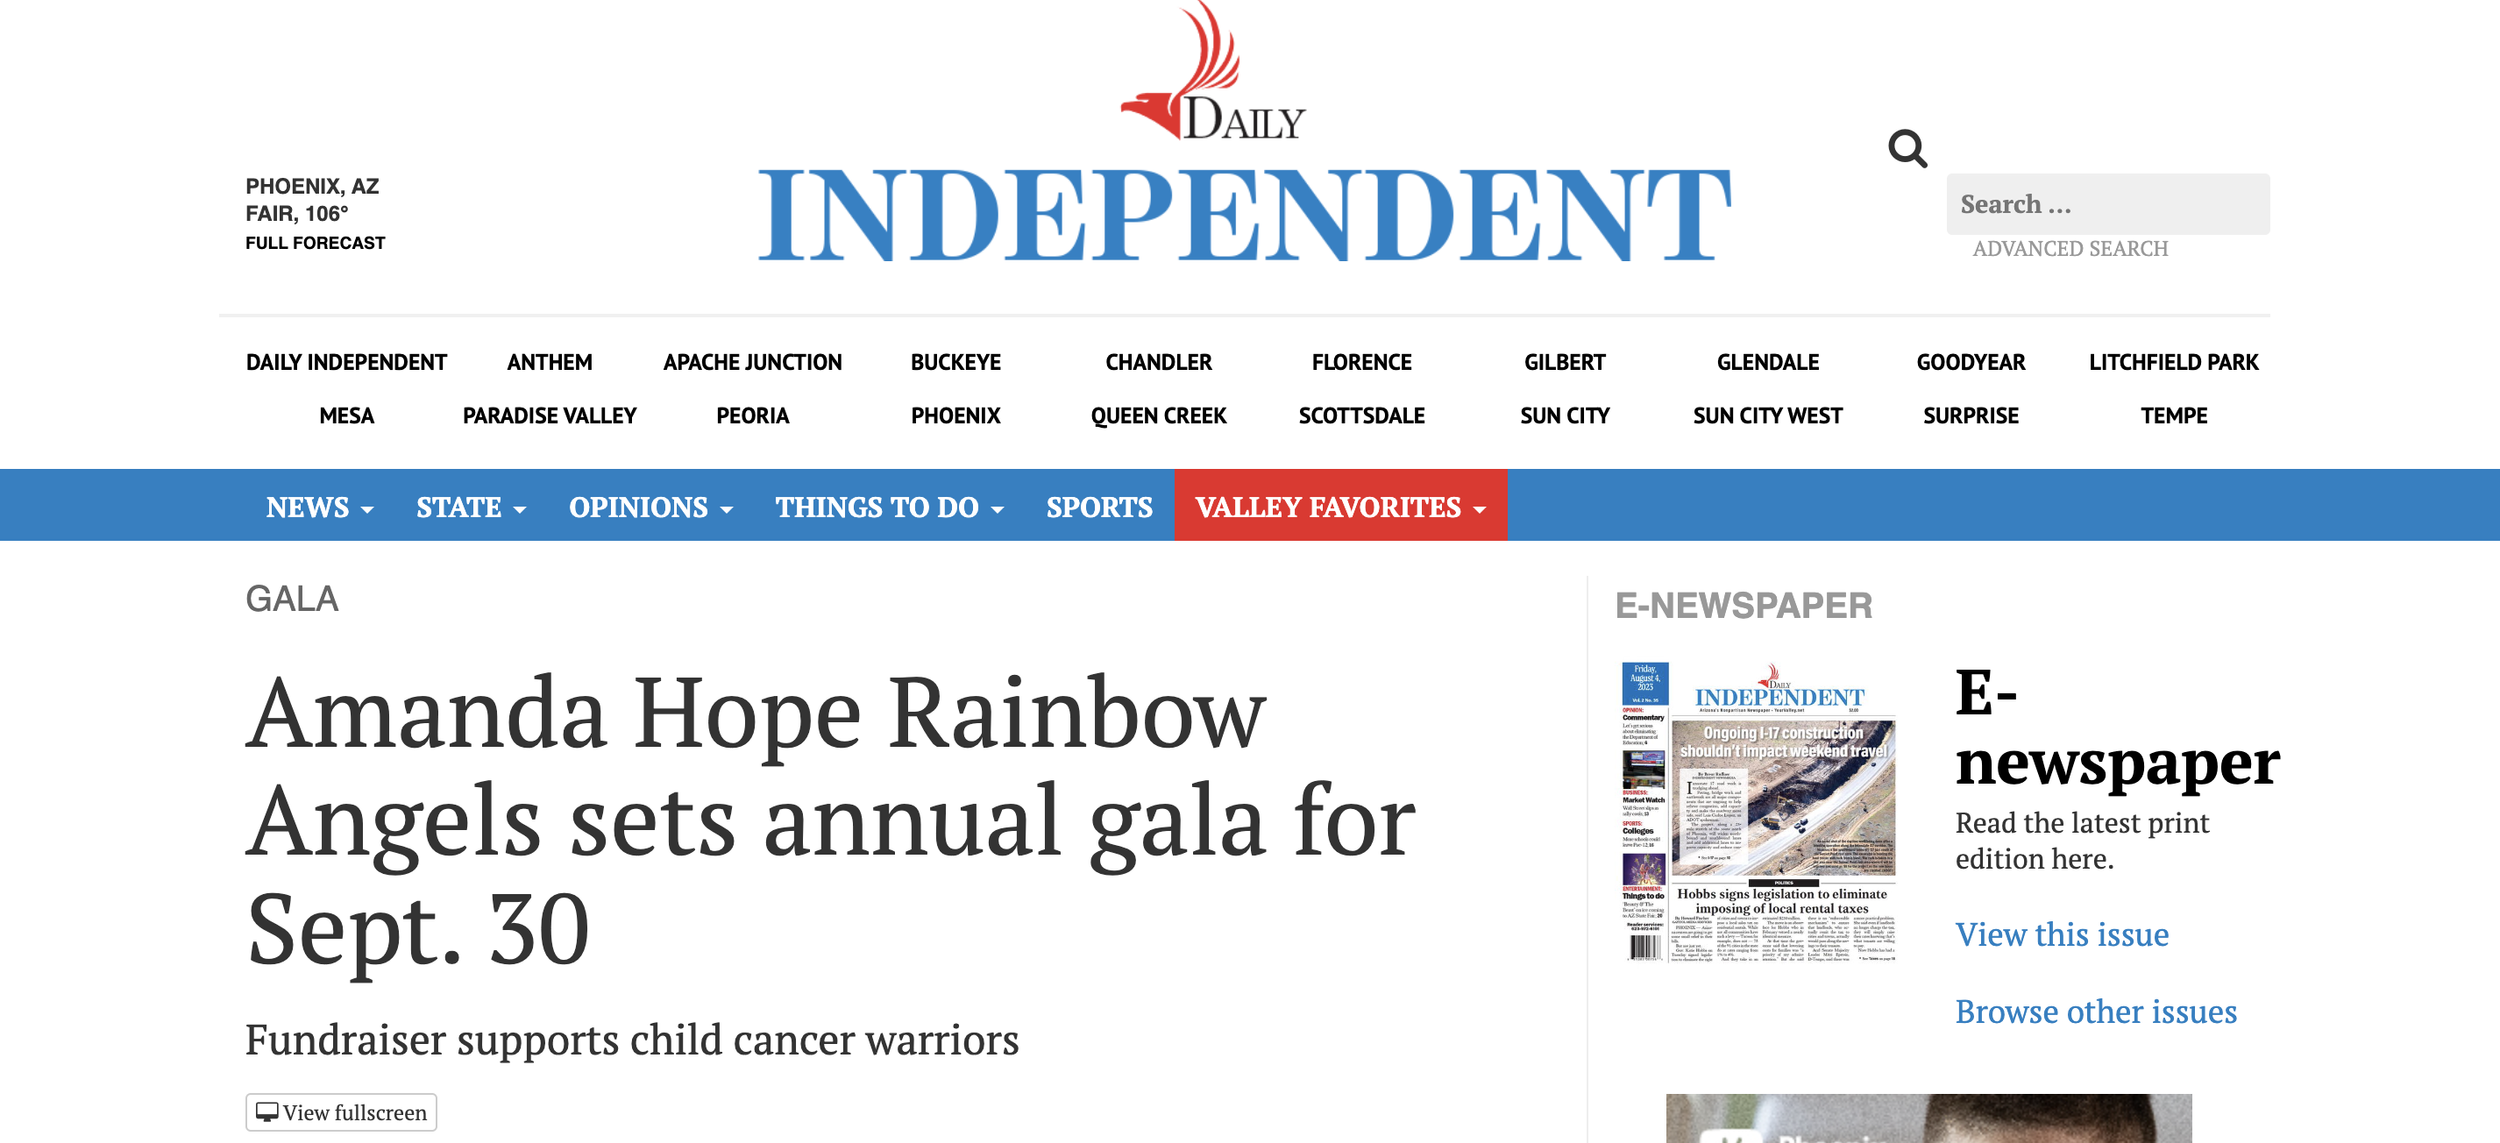 Daily Independent: Amanda Hope Rainbow Angels sets annual gala for Sept. 30 (Copy)